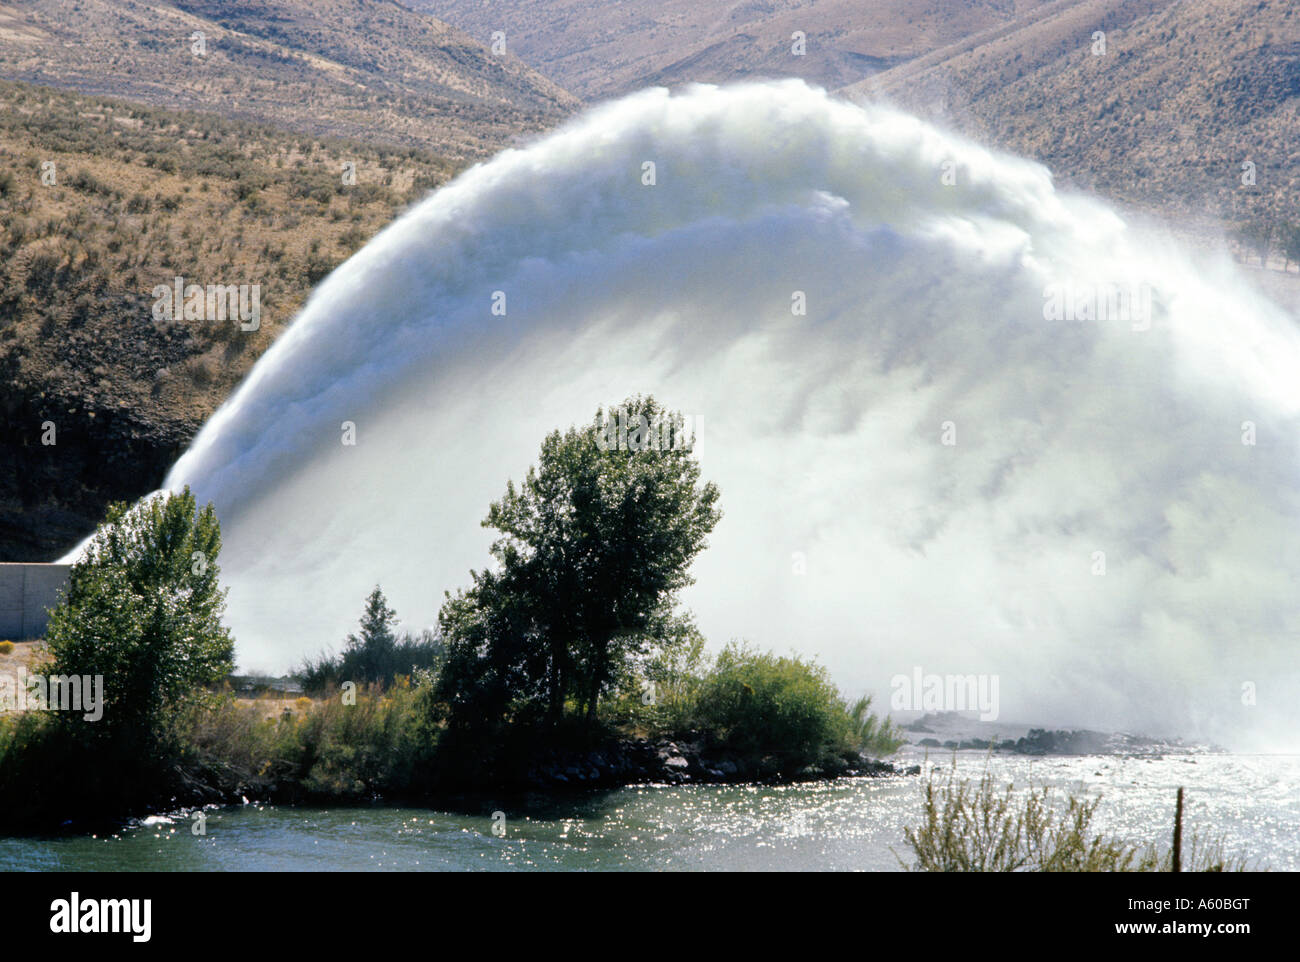 Water being let out of Lucky Peak Dam creates a rooster tail near